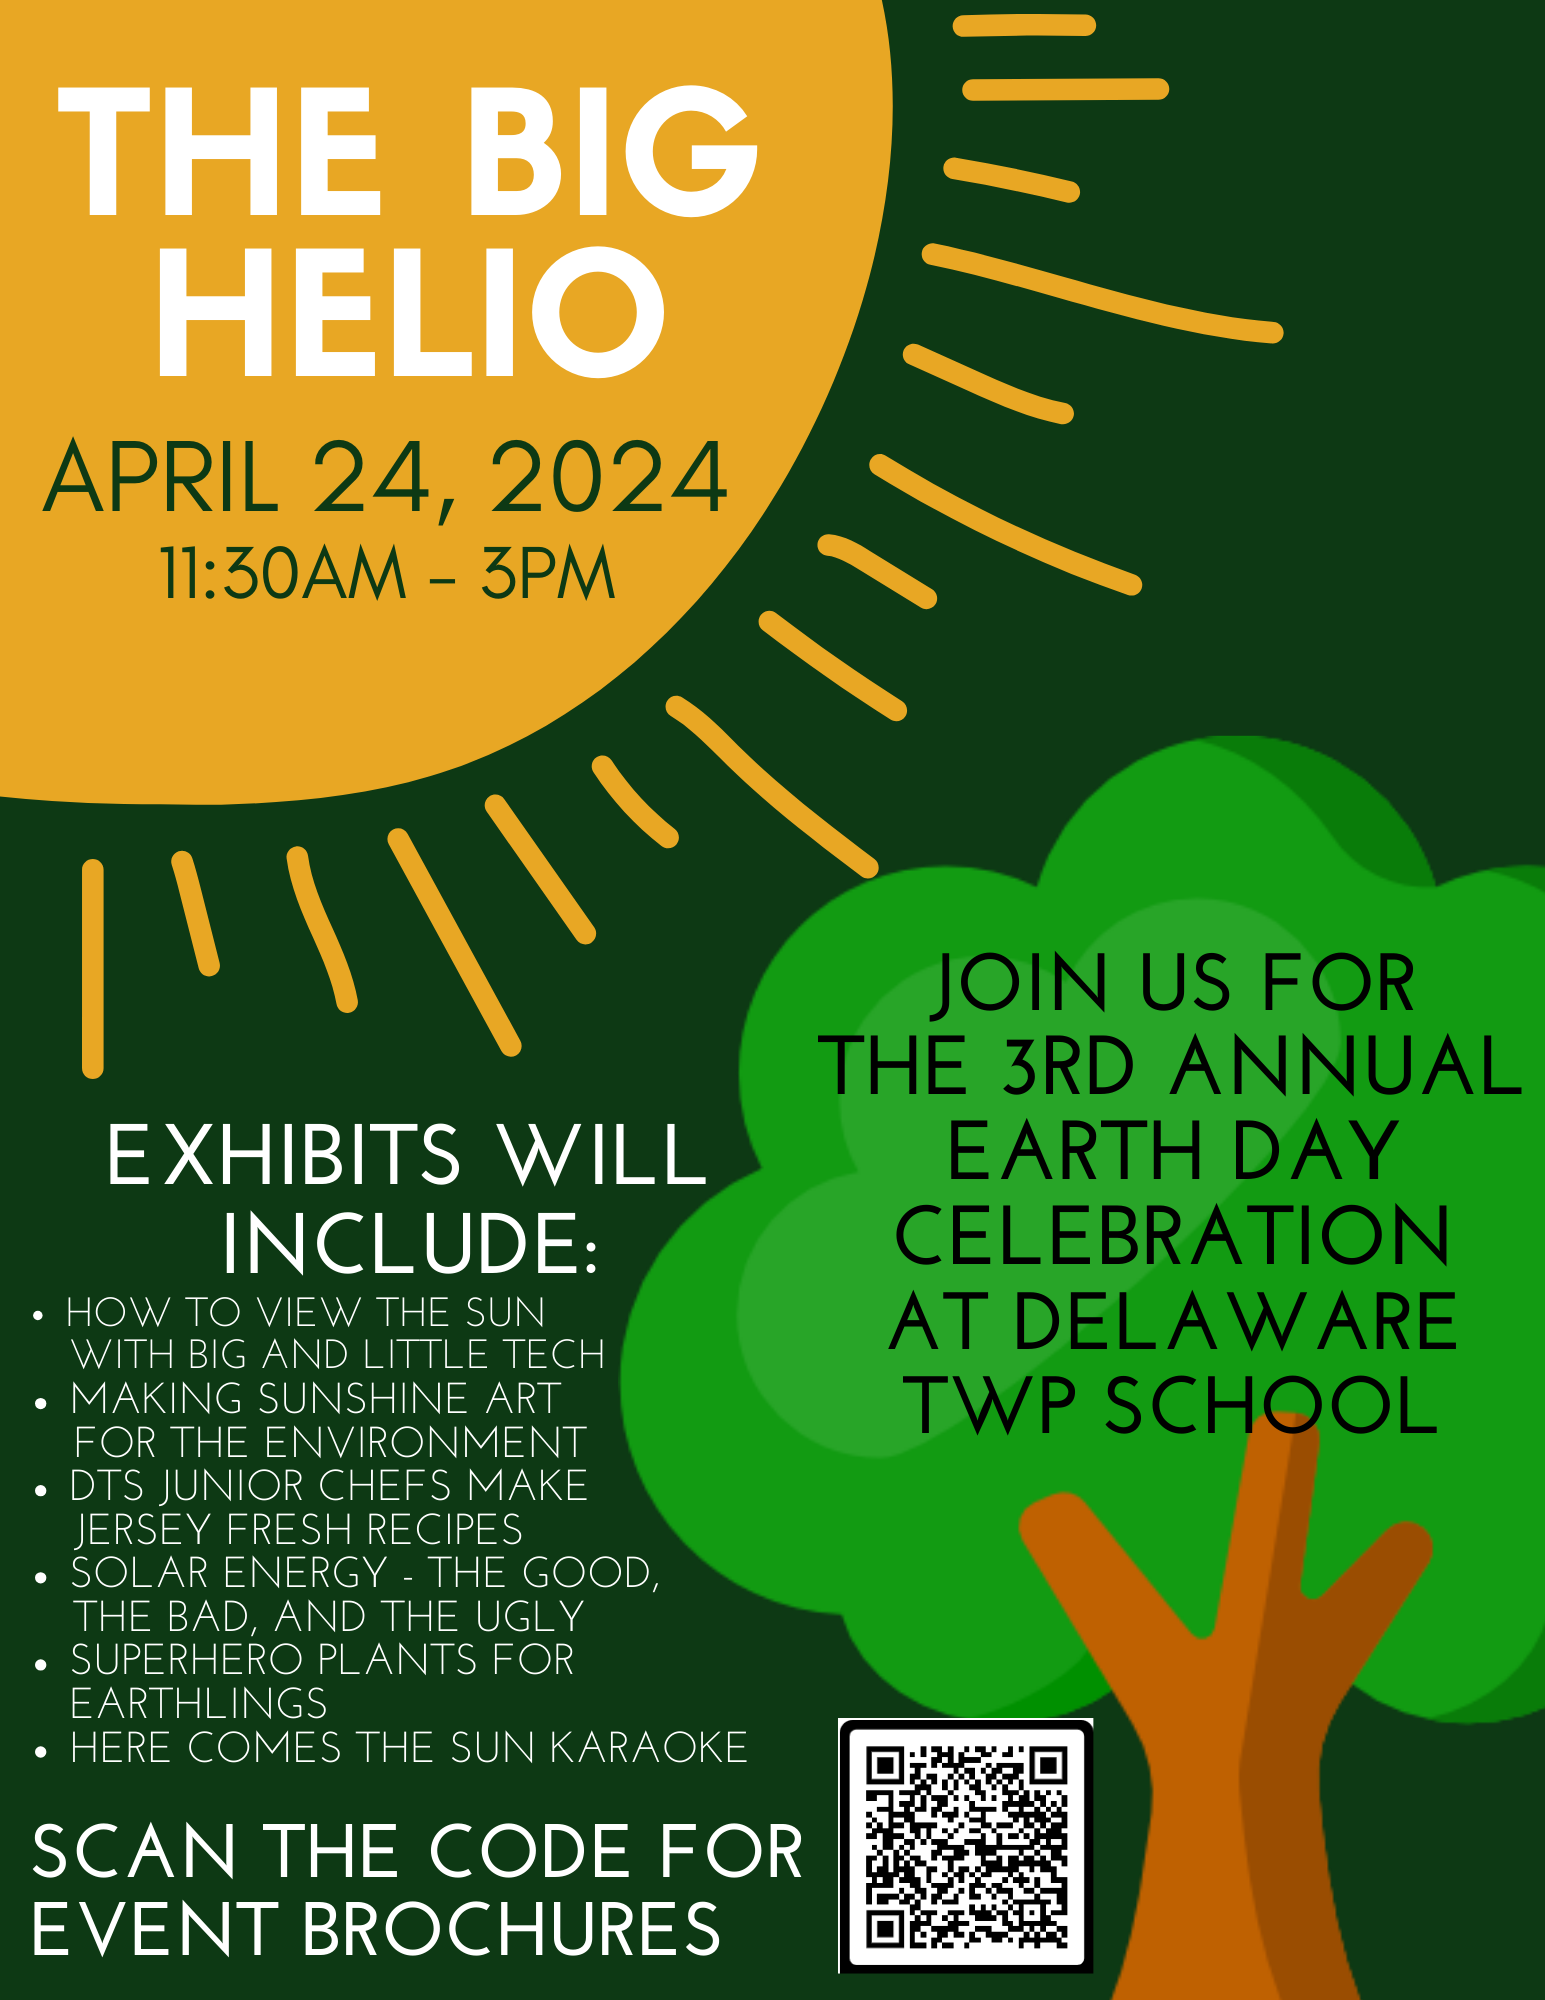 Earth Day Event flyer with a dark green background and a cartoon image of a sun in the upper left corner, and a tree in the lower right. On the tree and sun are details about the event.